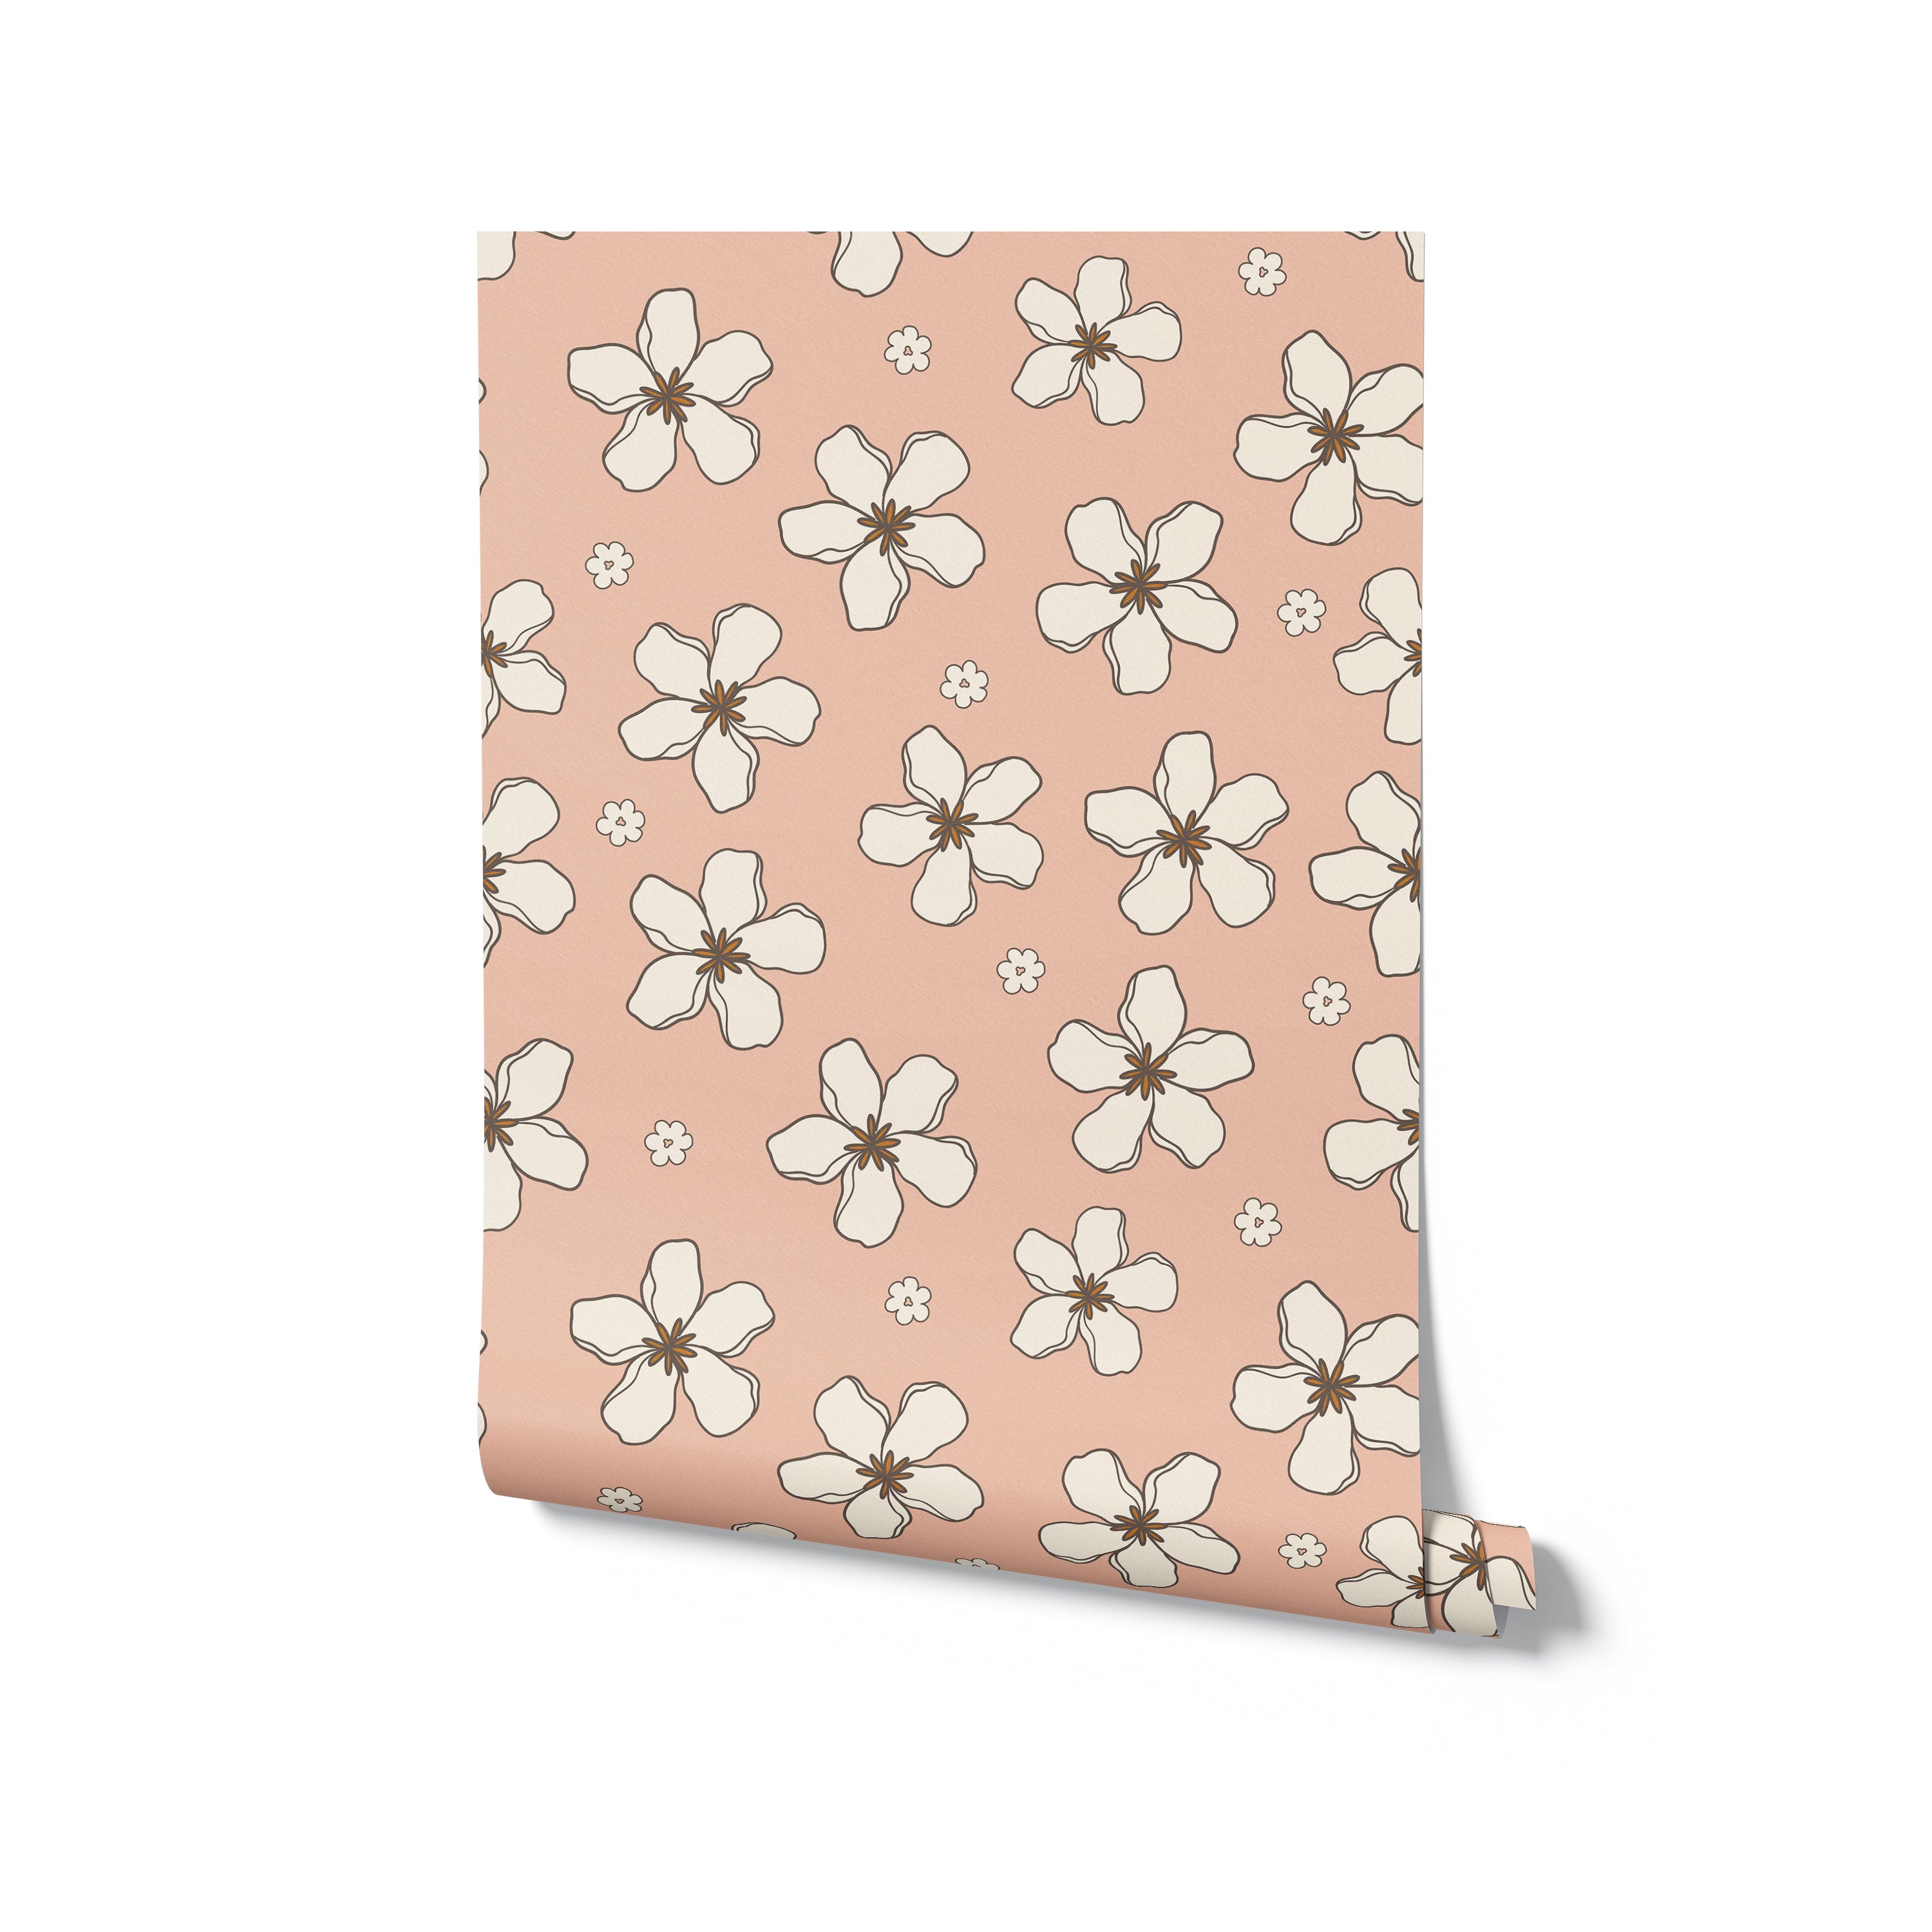 A roll of Retro Pink Flowers Wallpaper, displaying a pattern of bold white blooms with golden centers on a pink backdrop, ideal for adding a vintage yet timeless feel to any room.